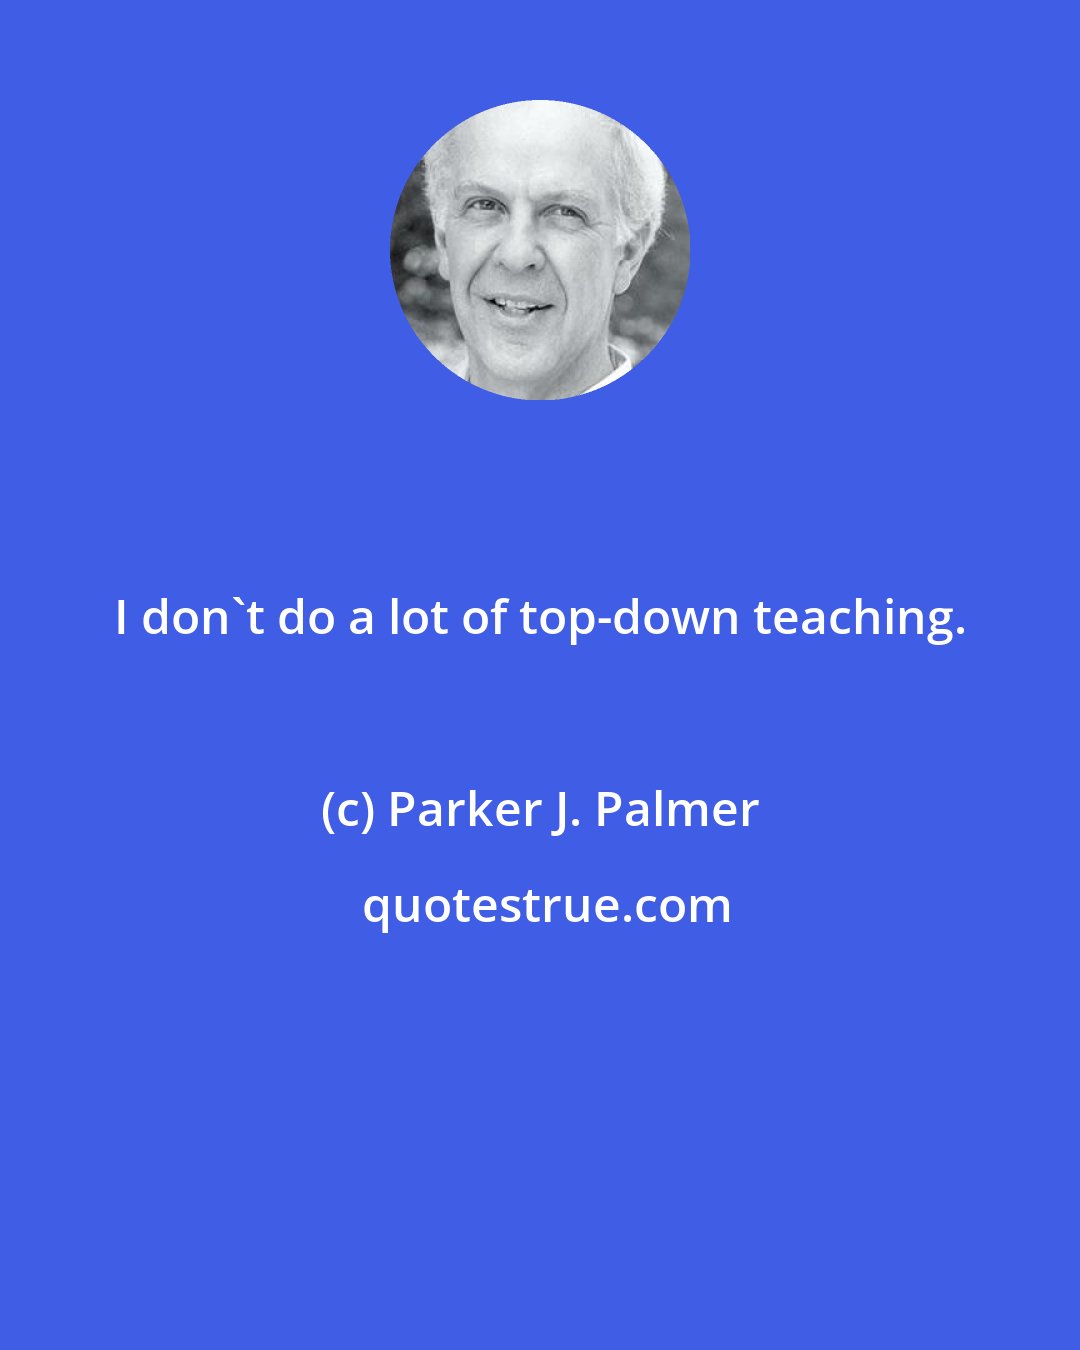 Parker J. Palmer: I don't do a lot of top-down teaching.